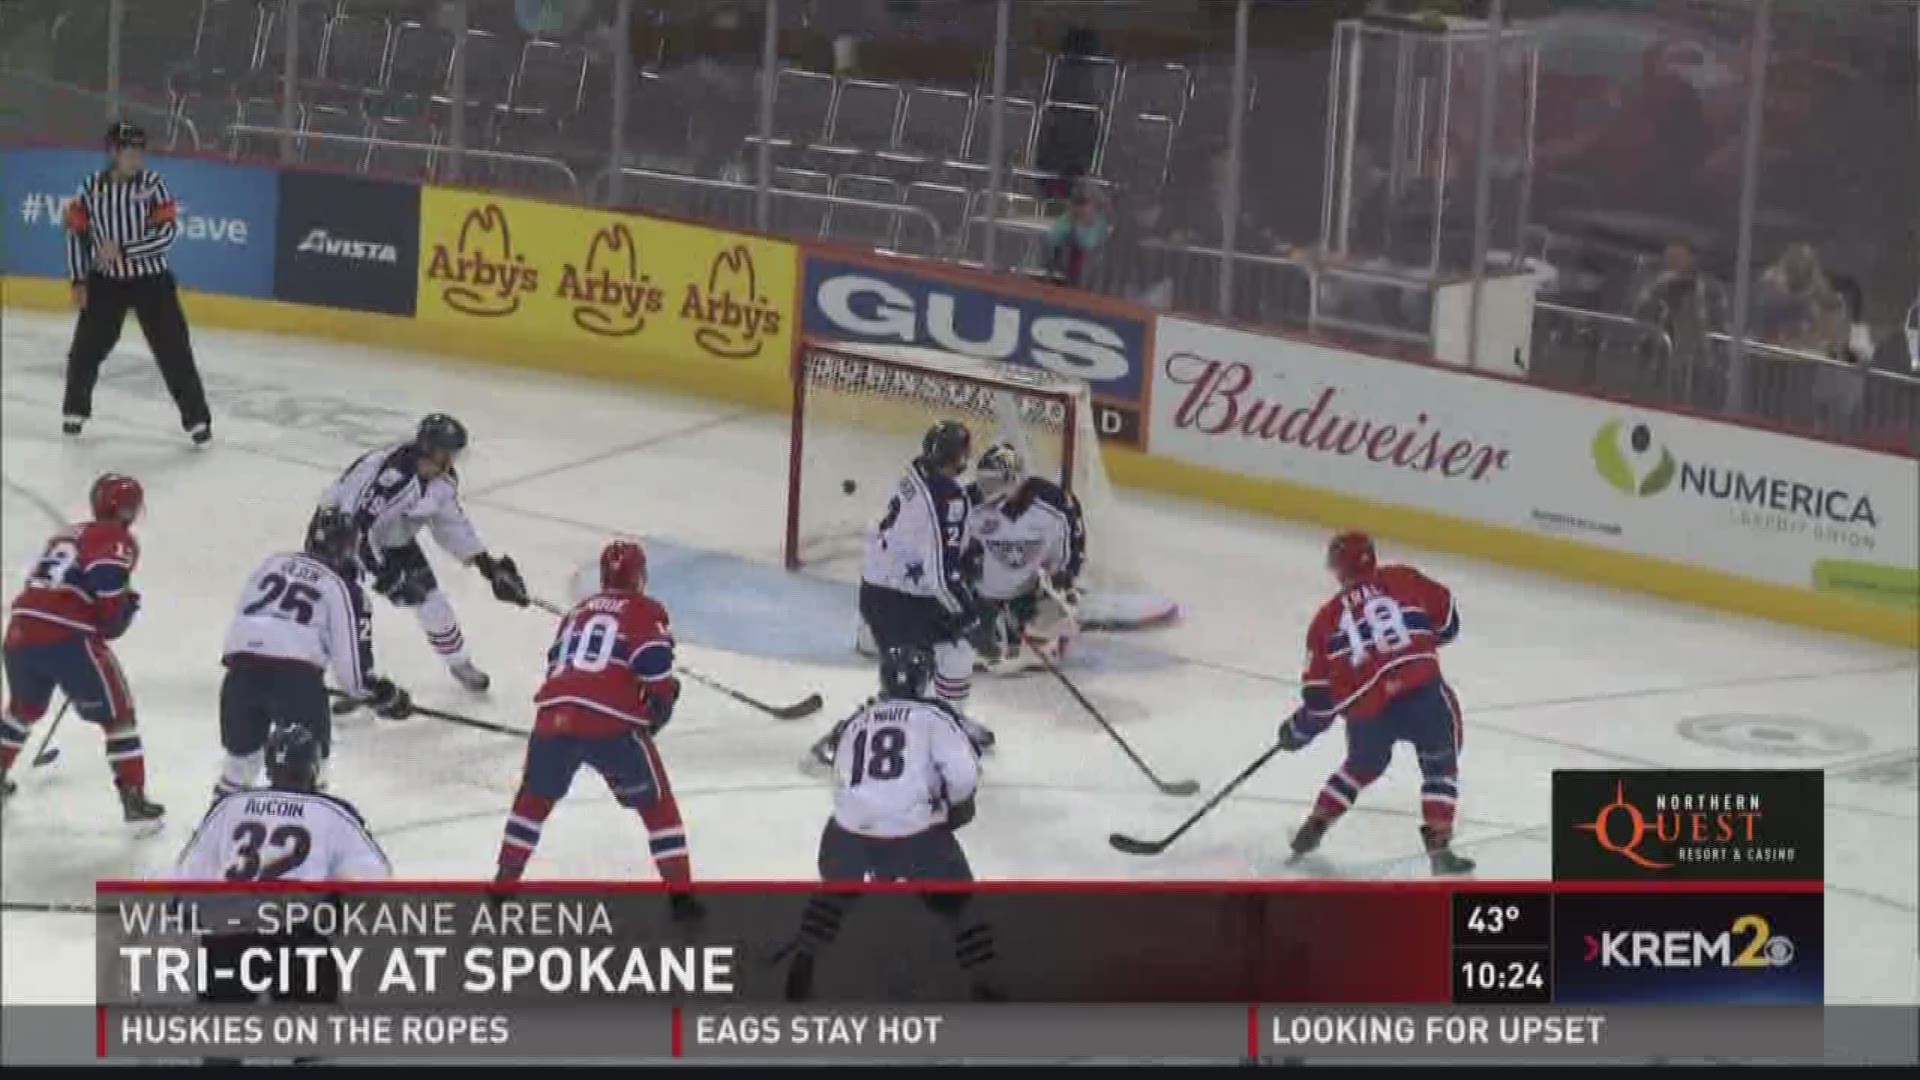 The Chiefs started off hot, but Tri-City does the real damage in the 3rd period winning 5-2 in Spokane.